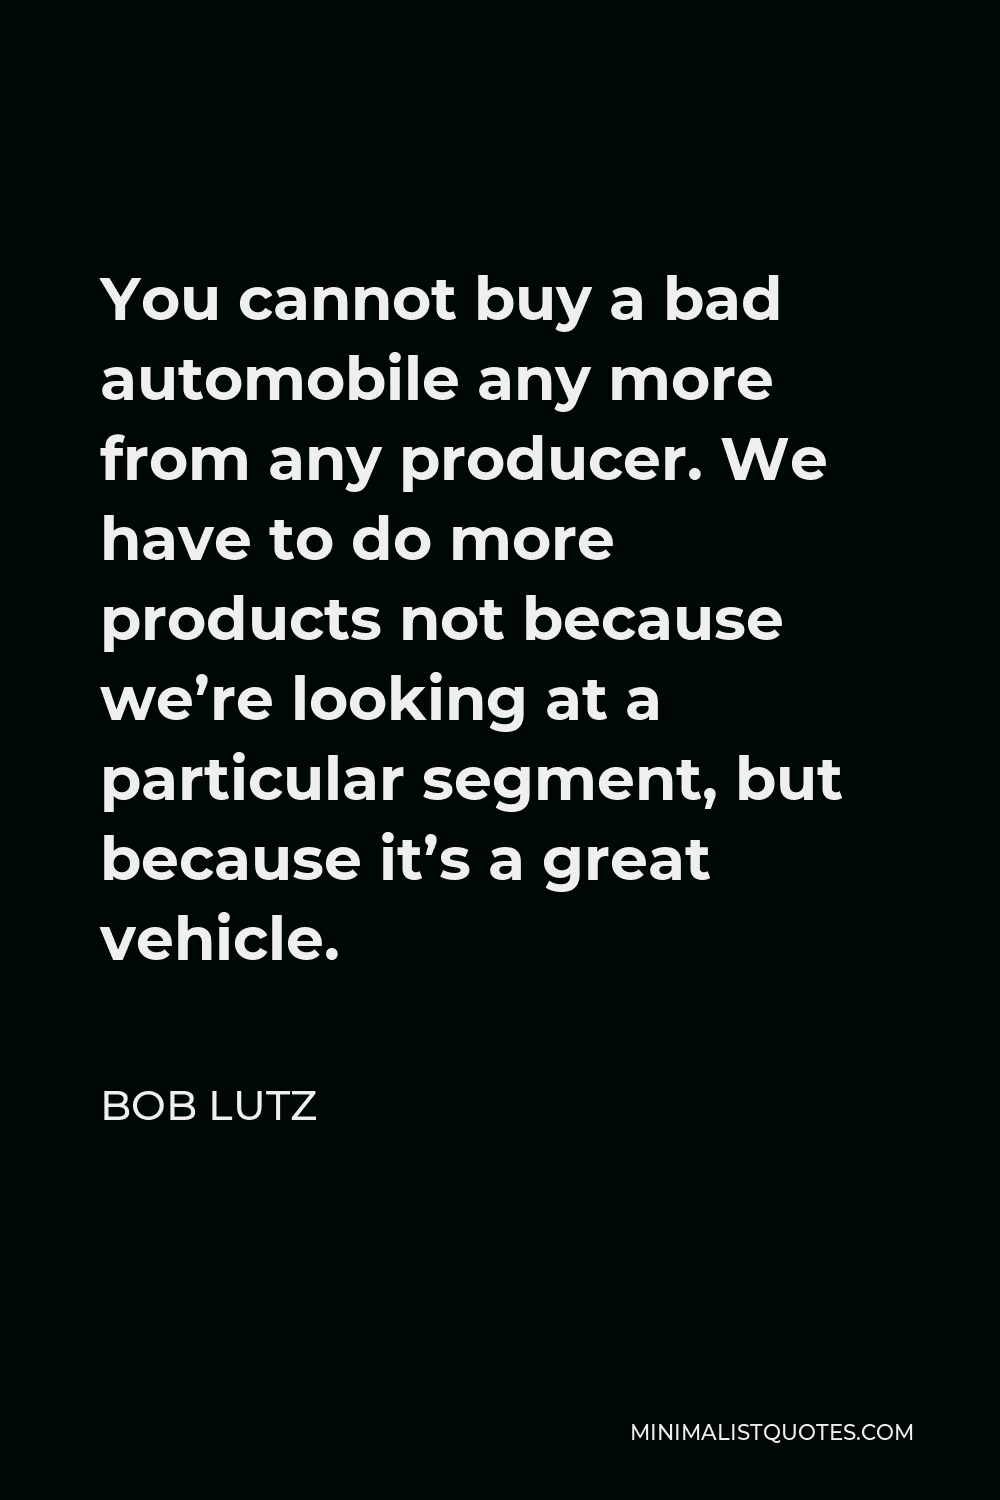 Bob Lutz Quote - You cannot buy a bad automobile any more from any producer. We have to do more products not because we’re looking at a particular segment, but because it’s a great vehicle.